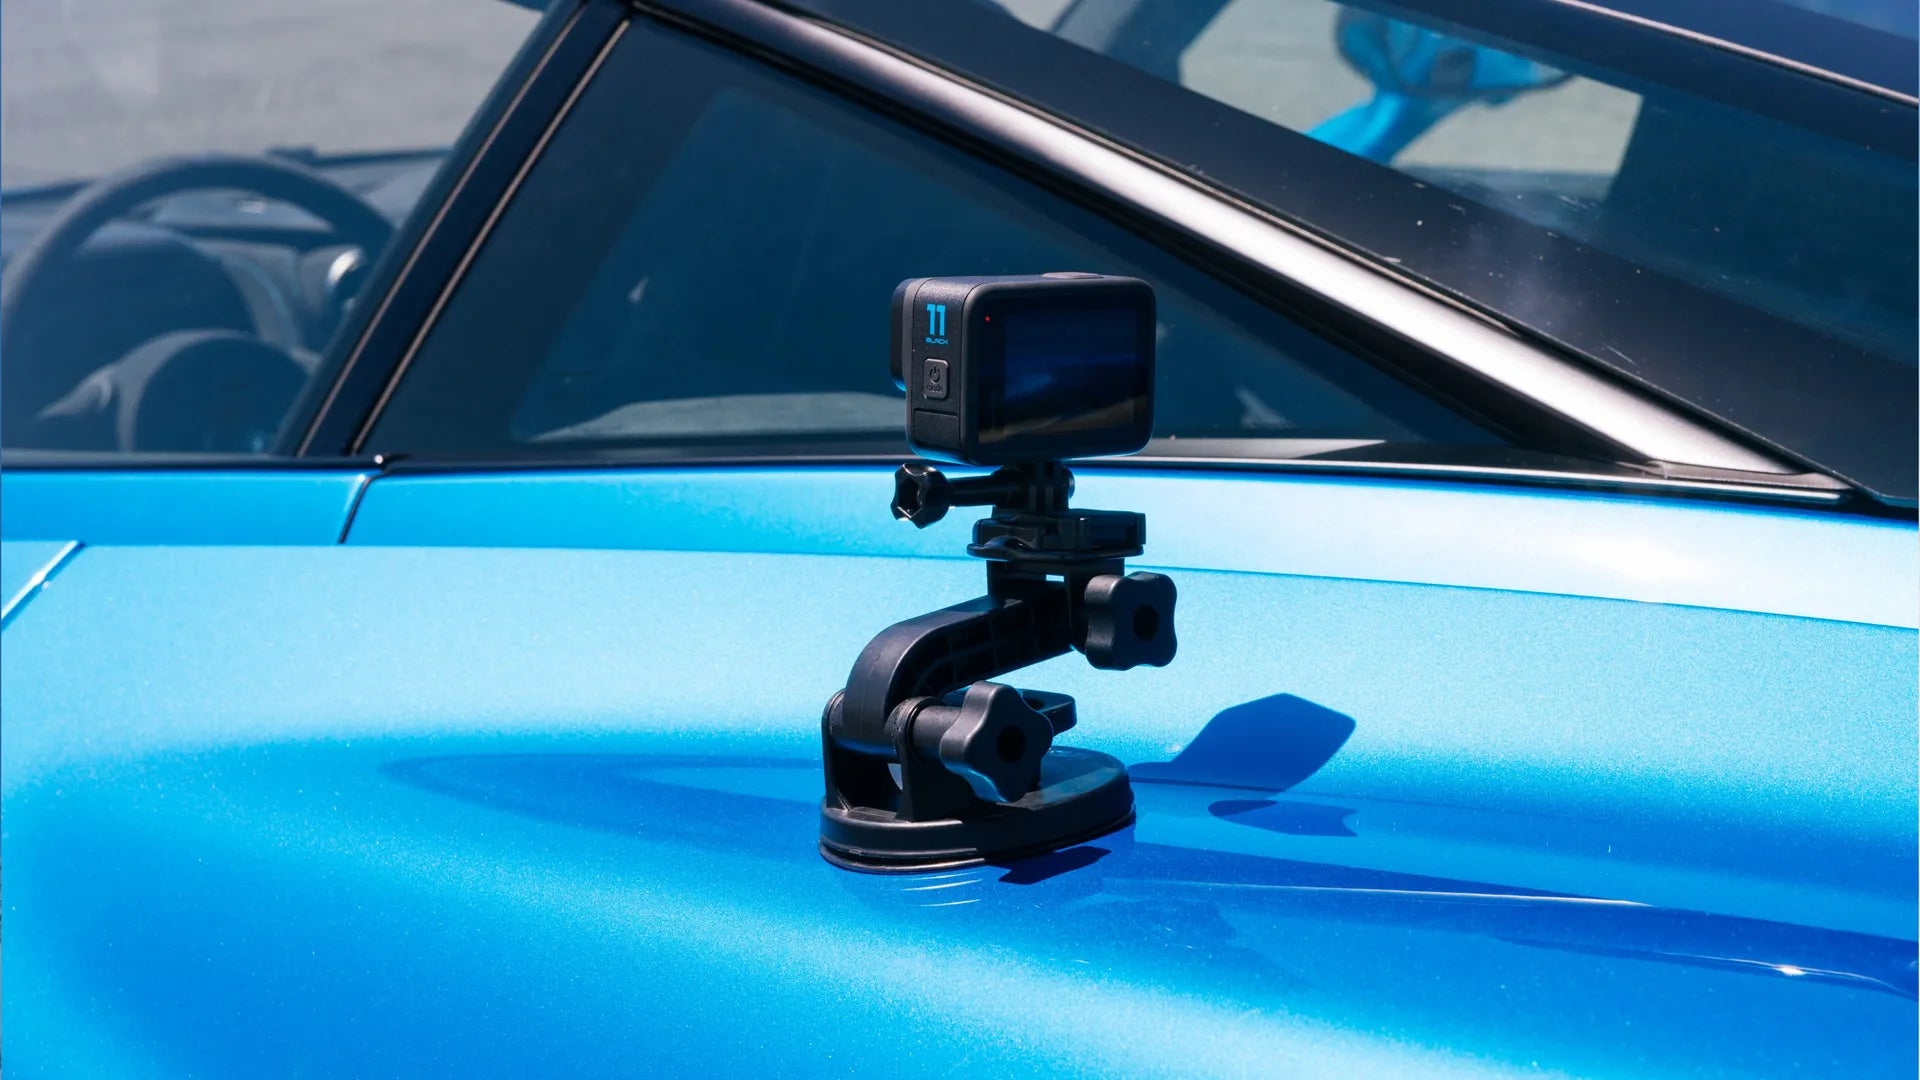 Product / Lifestyle photo of the camera attached to the rear side of a blue supercar